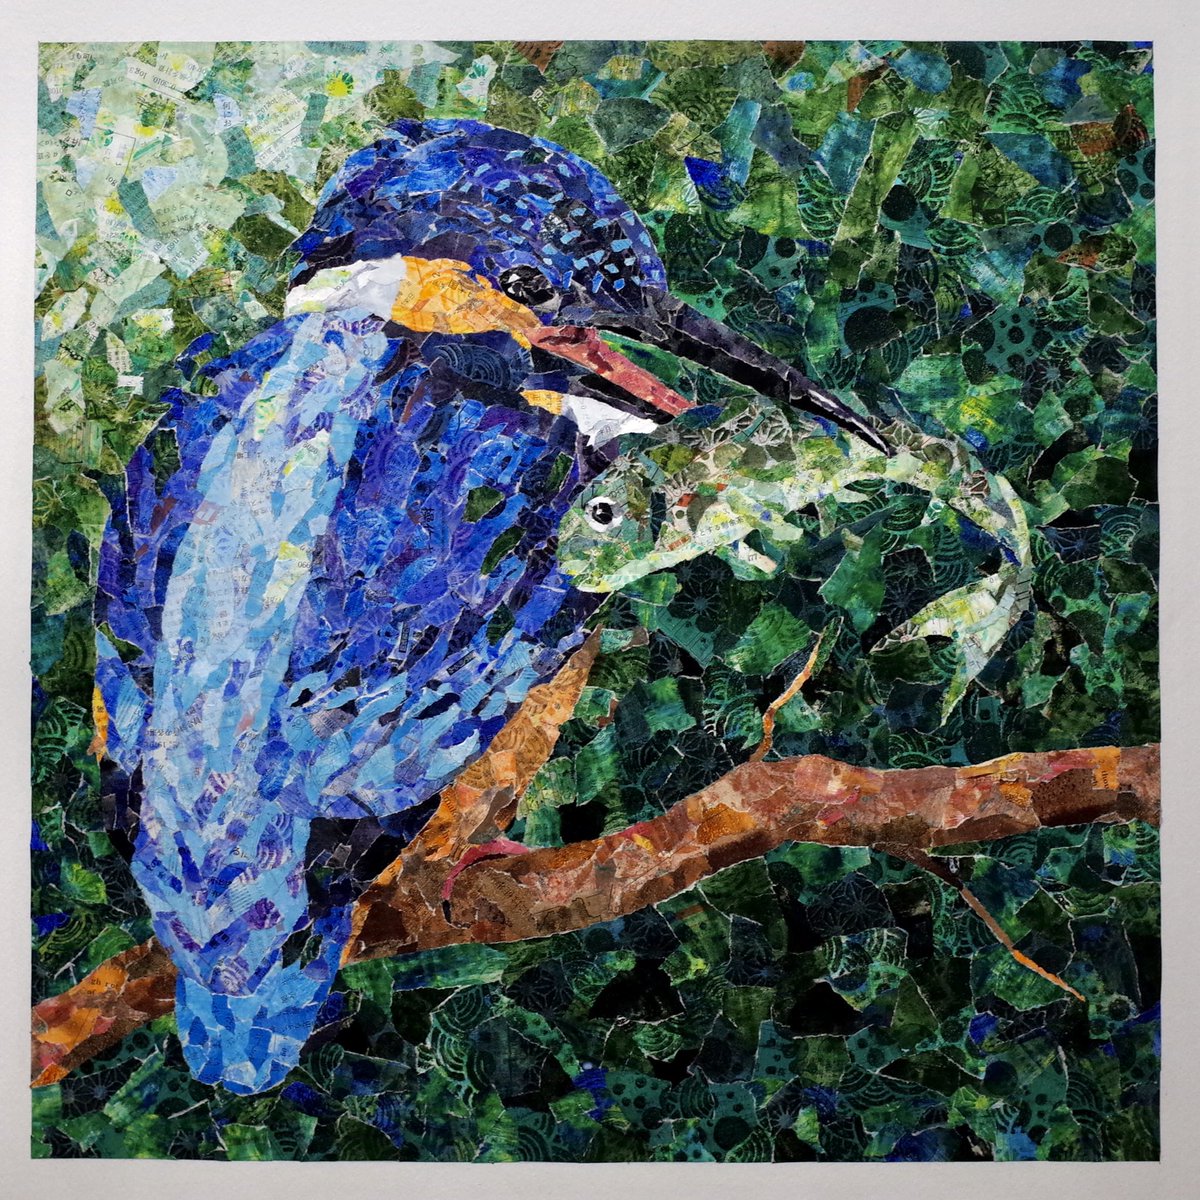 『 to live 』
(ちぎり絵・貼り絵　collage art ,41.0cm x 41.0cm) 

#カワセミ #翡翠 #kingfisher #fishing #fish #ちぎり絵 #コラージュ #コラージュアート #collage #collageart #paintedpapercollage #tornpapercollage